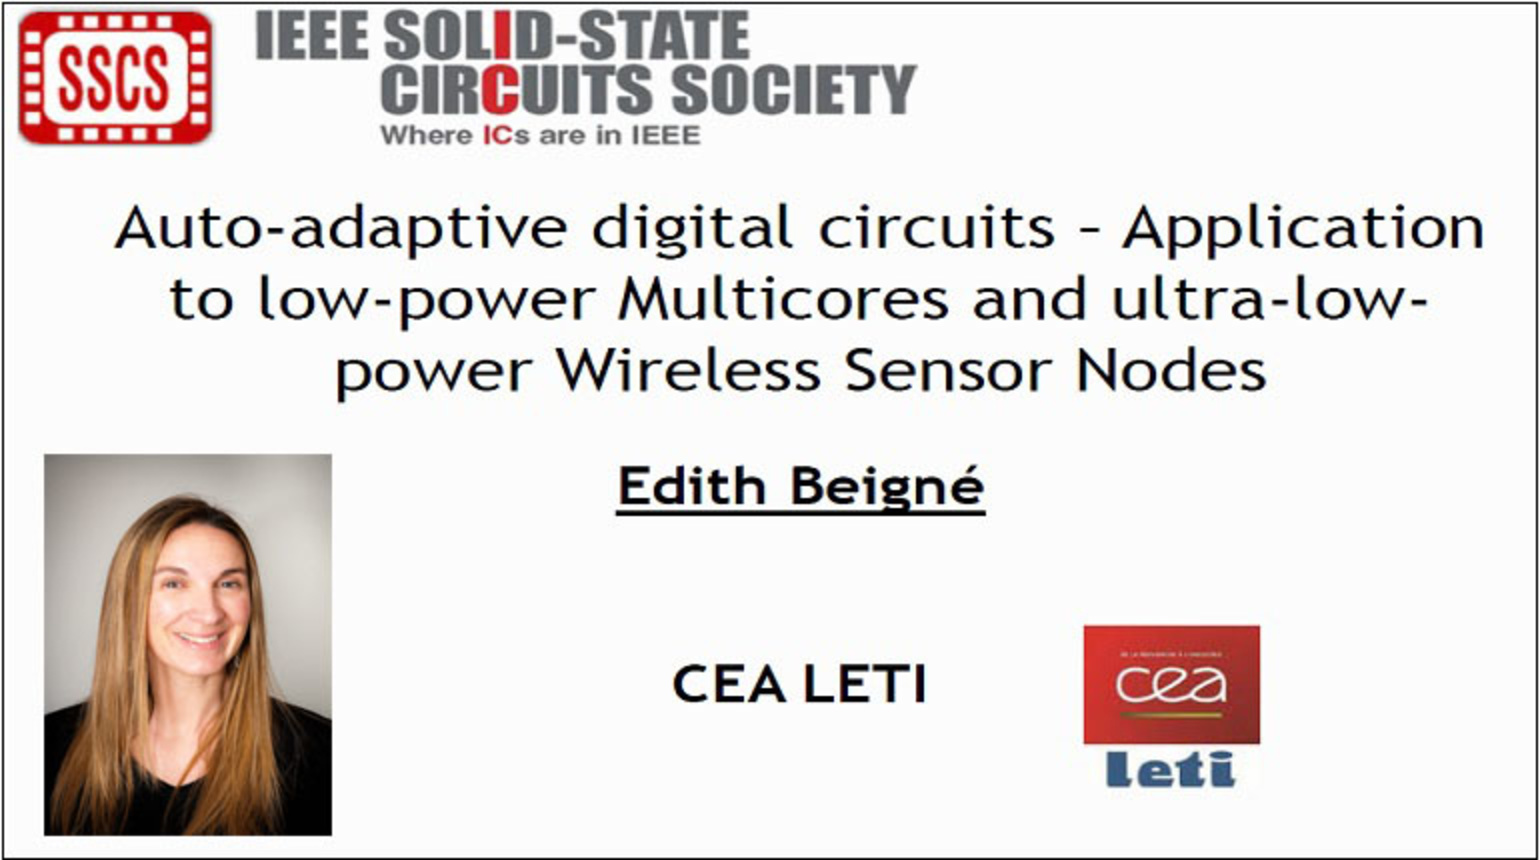 Auto-adaptive digital circuits - Application to low-power Multicores and ultra-low-power Wireless Sensor Nodes Video